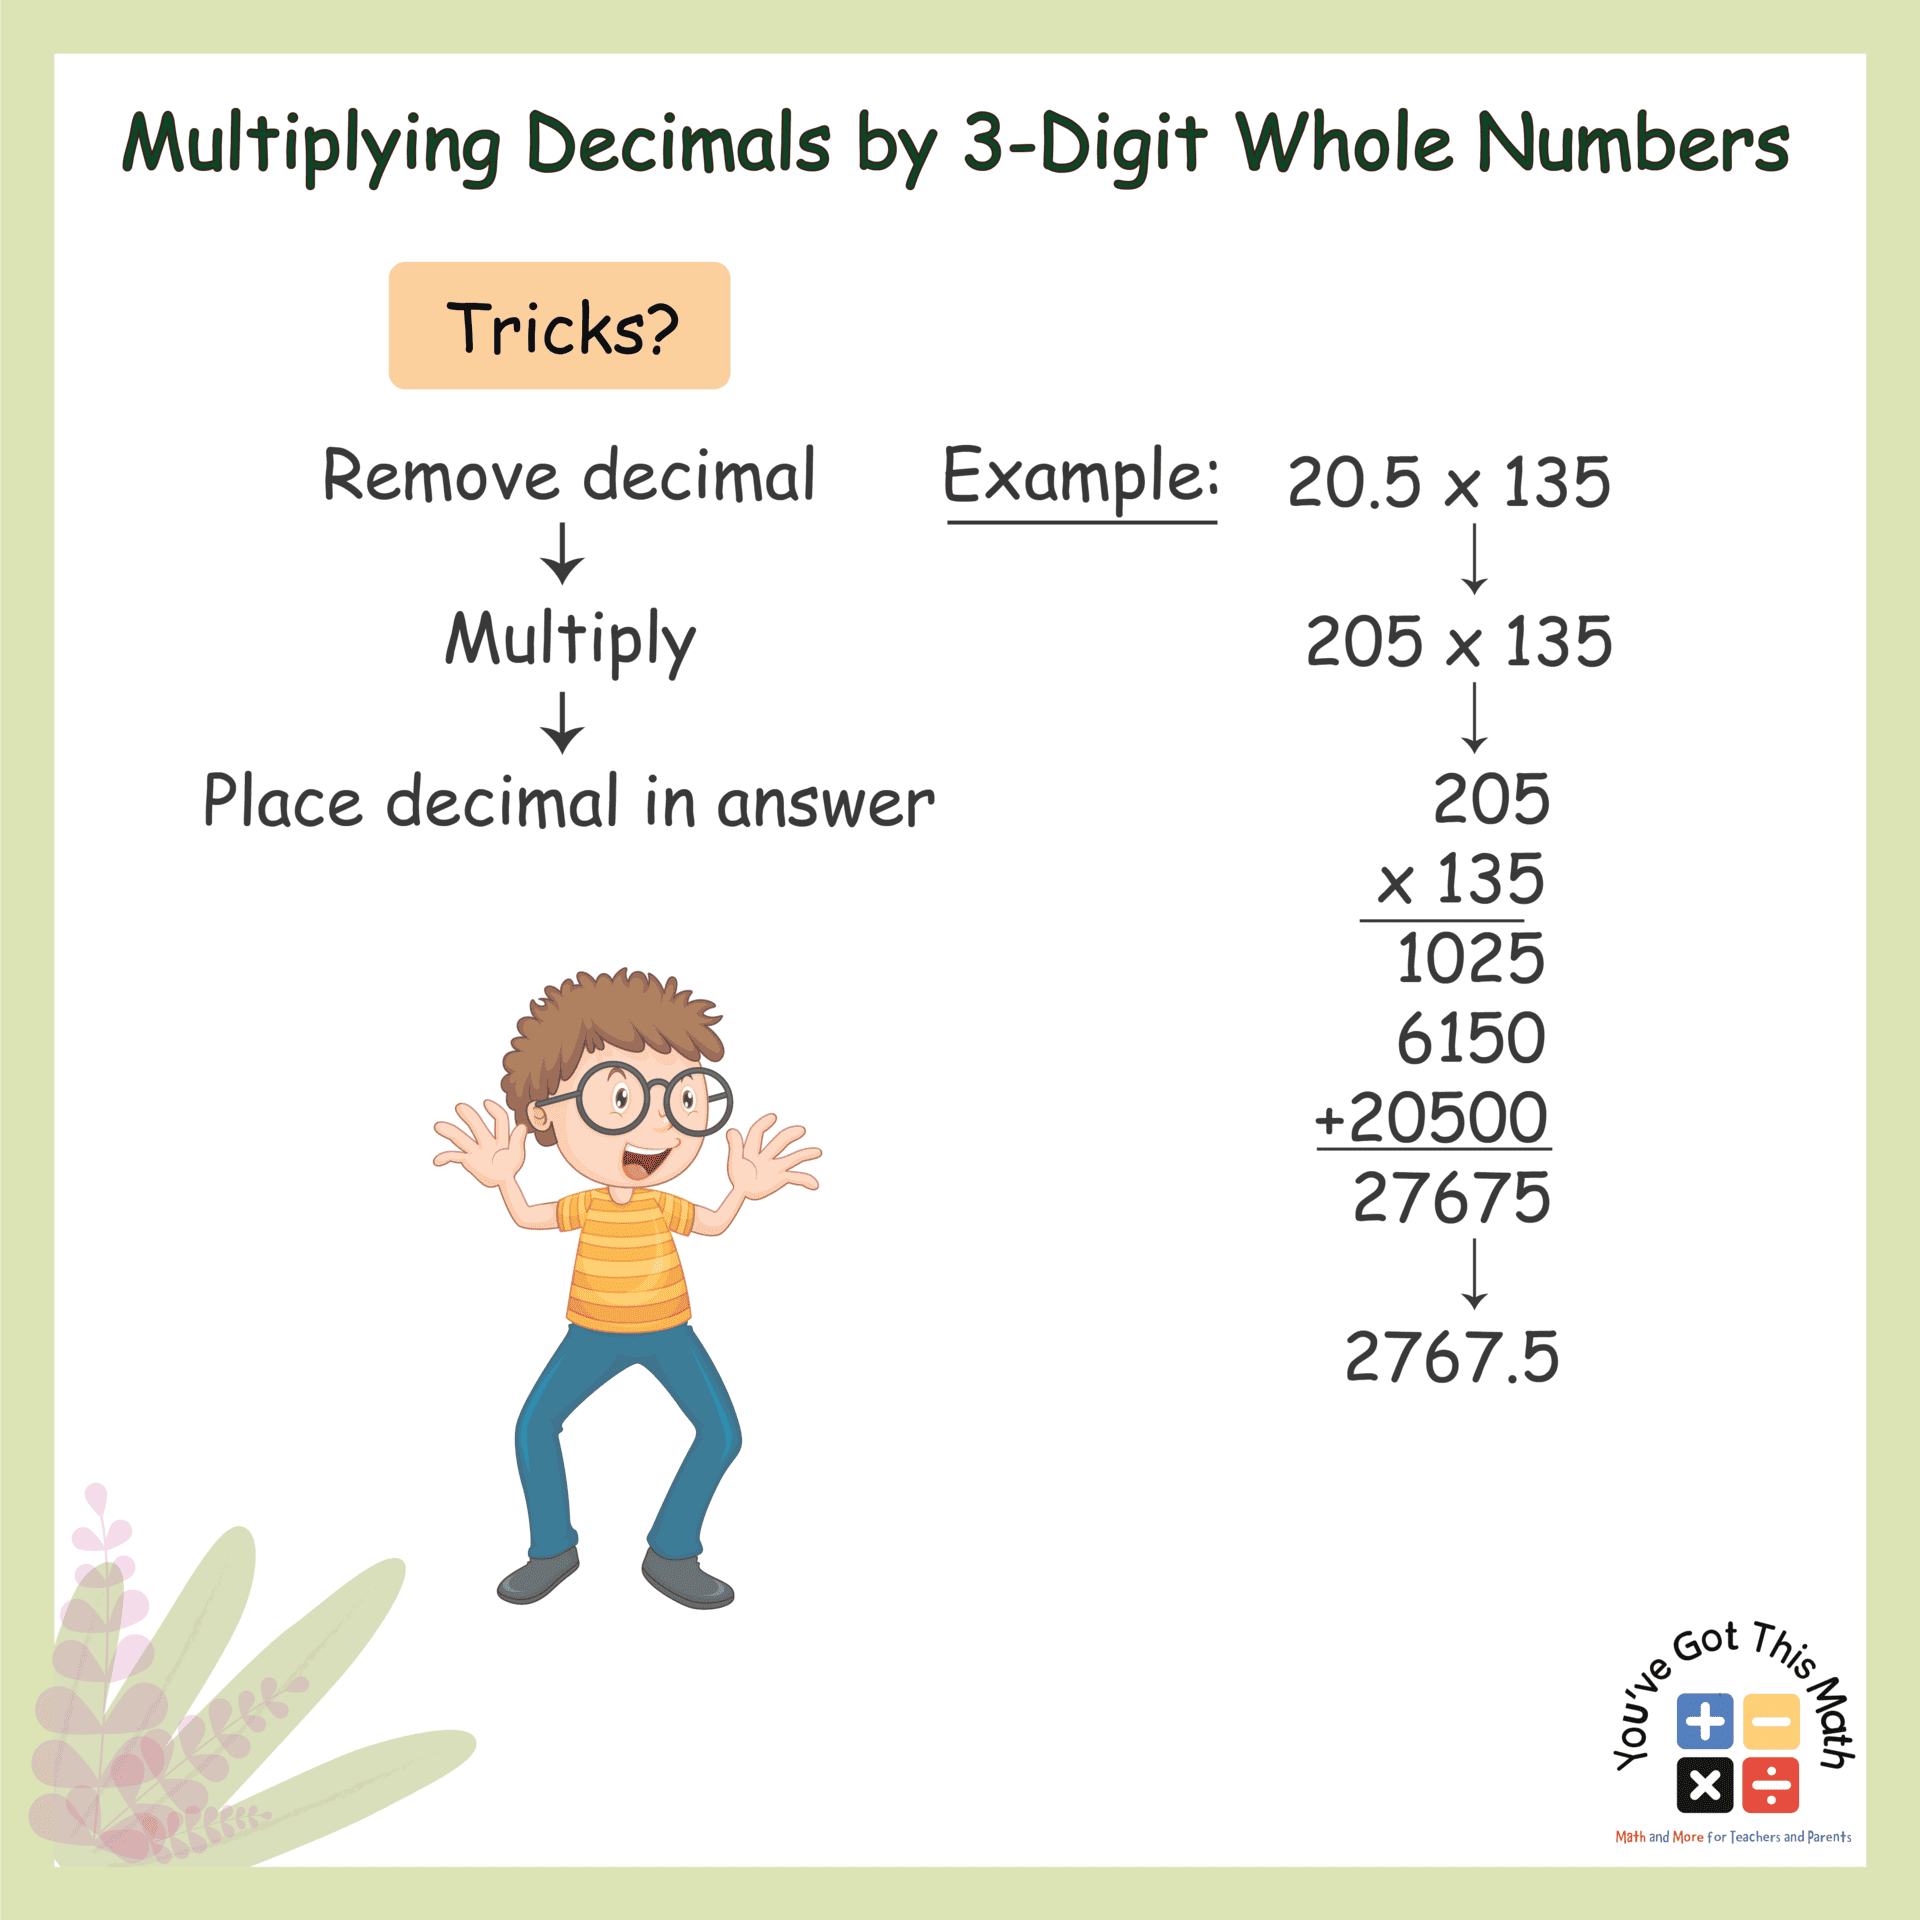 Multiplying Decimals by 3-Digit Whole Numbers2-01